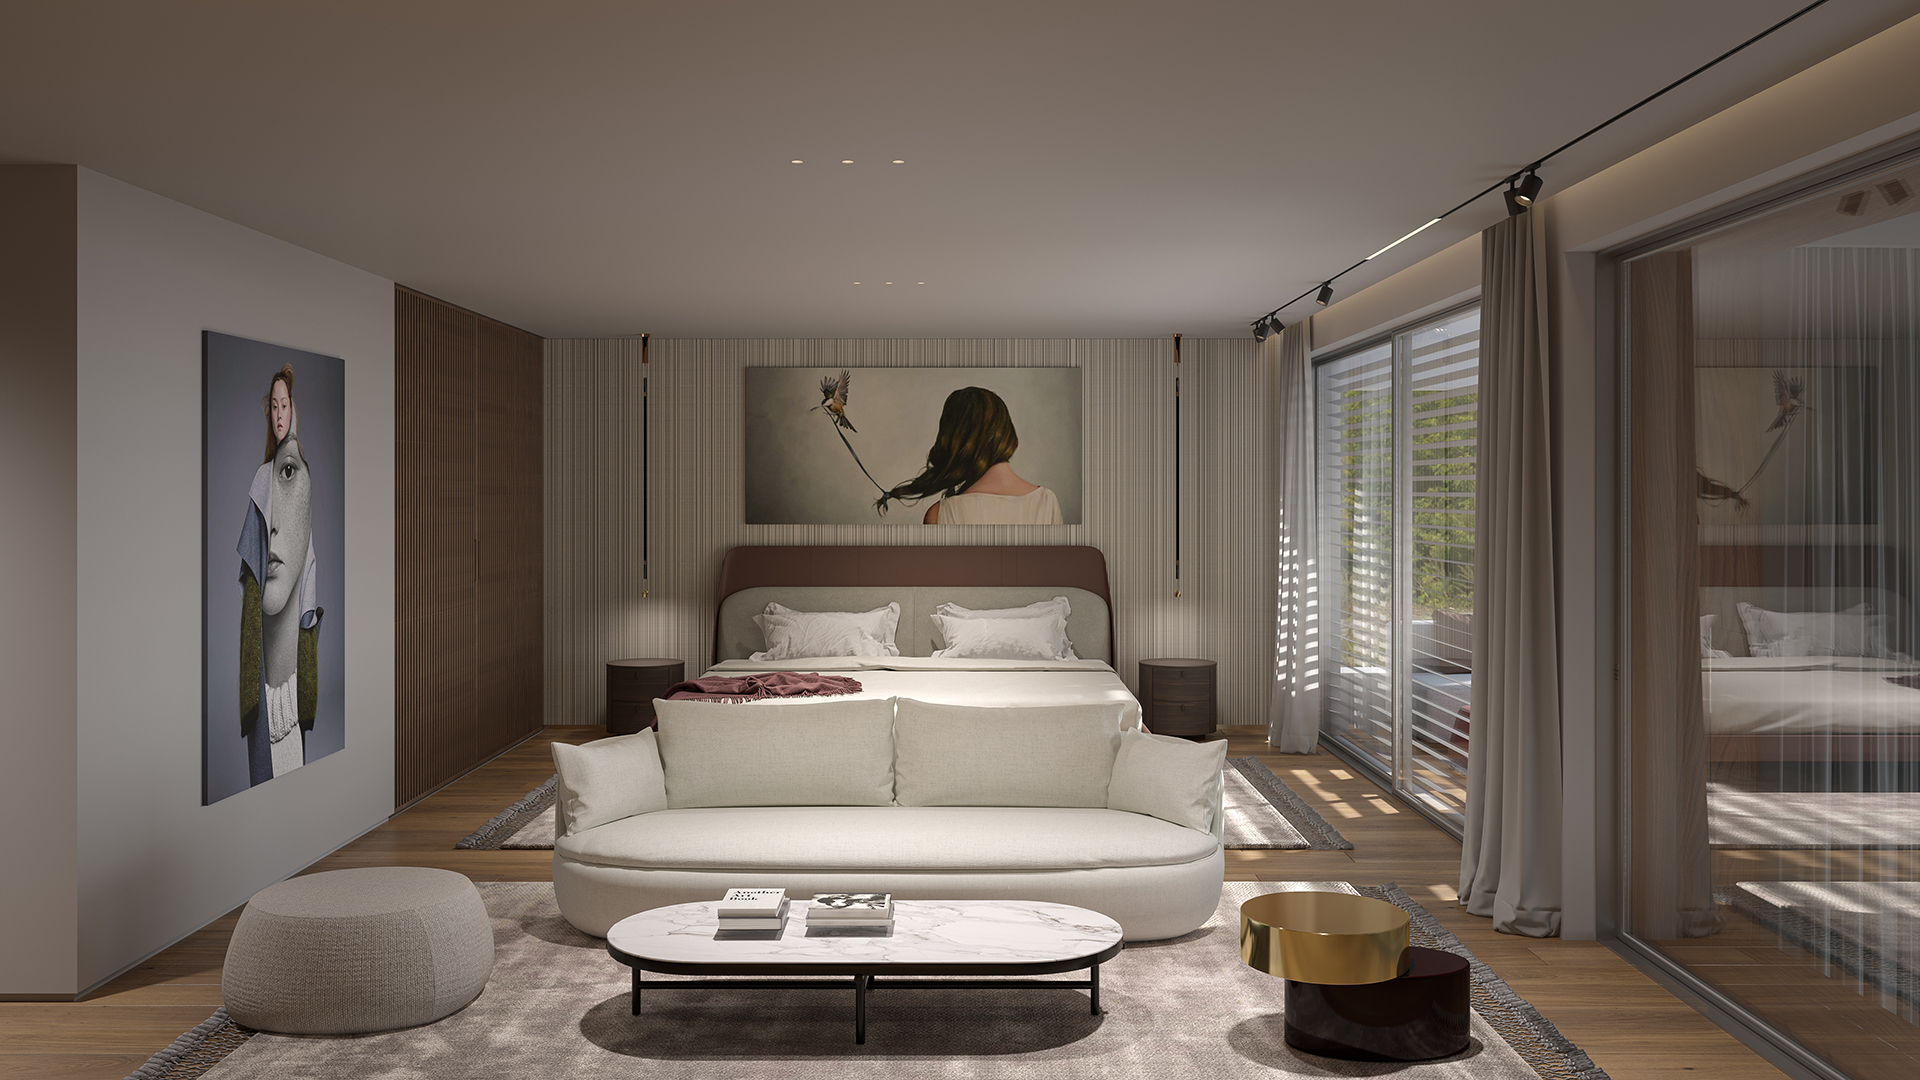 Maayan-Golan_Architectural-Visualization_interior-visualization_private-residential_master-bedroom_interior-design-by-tal-tamir_02